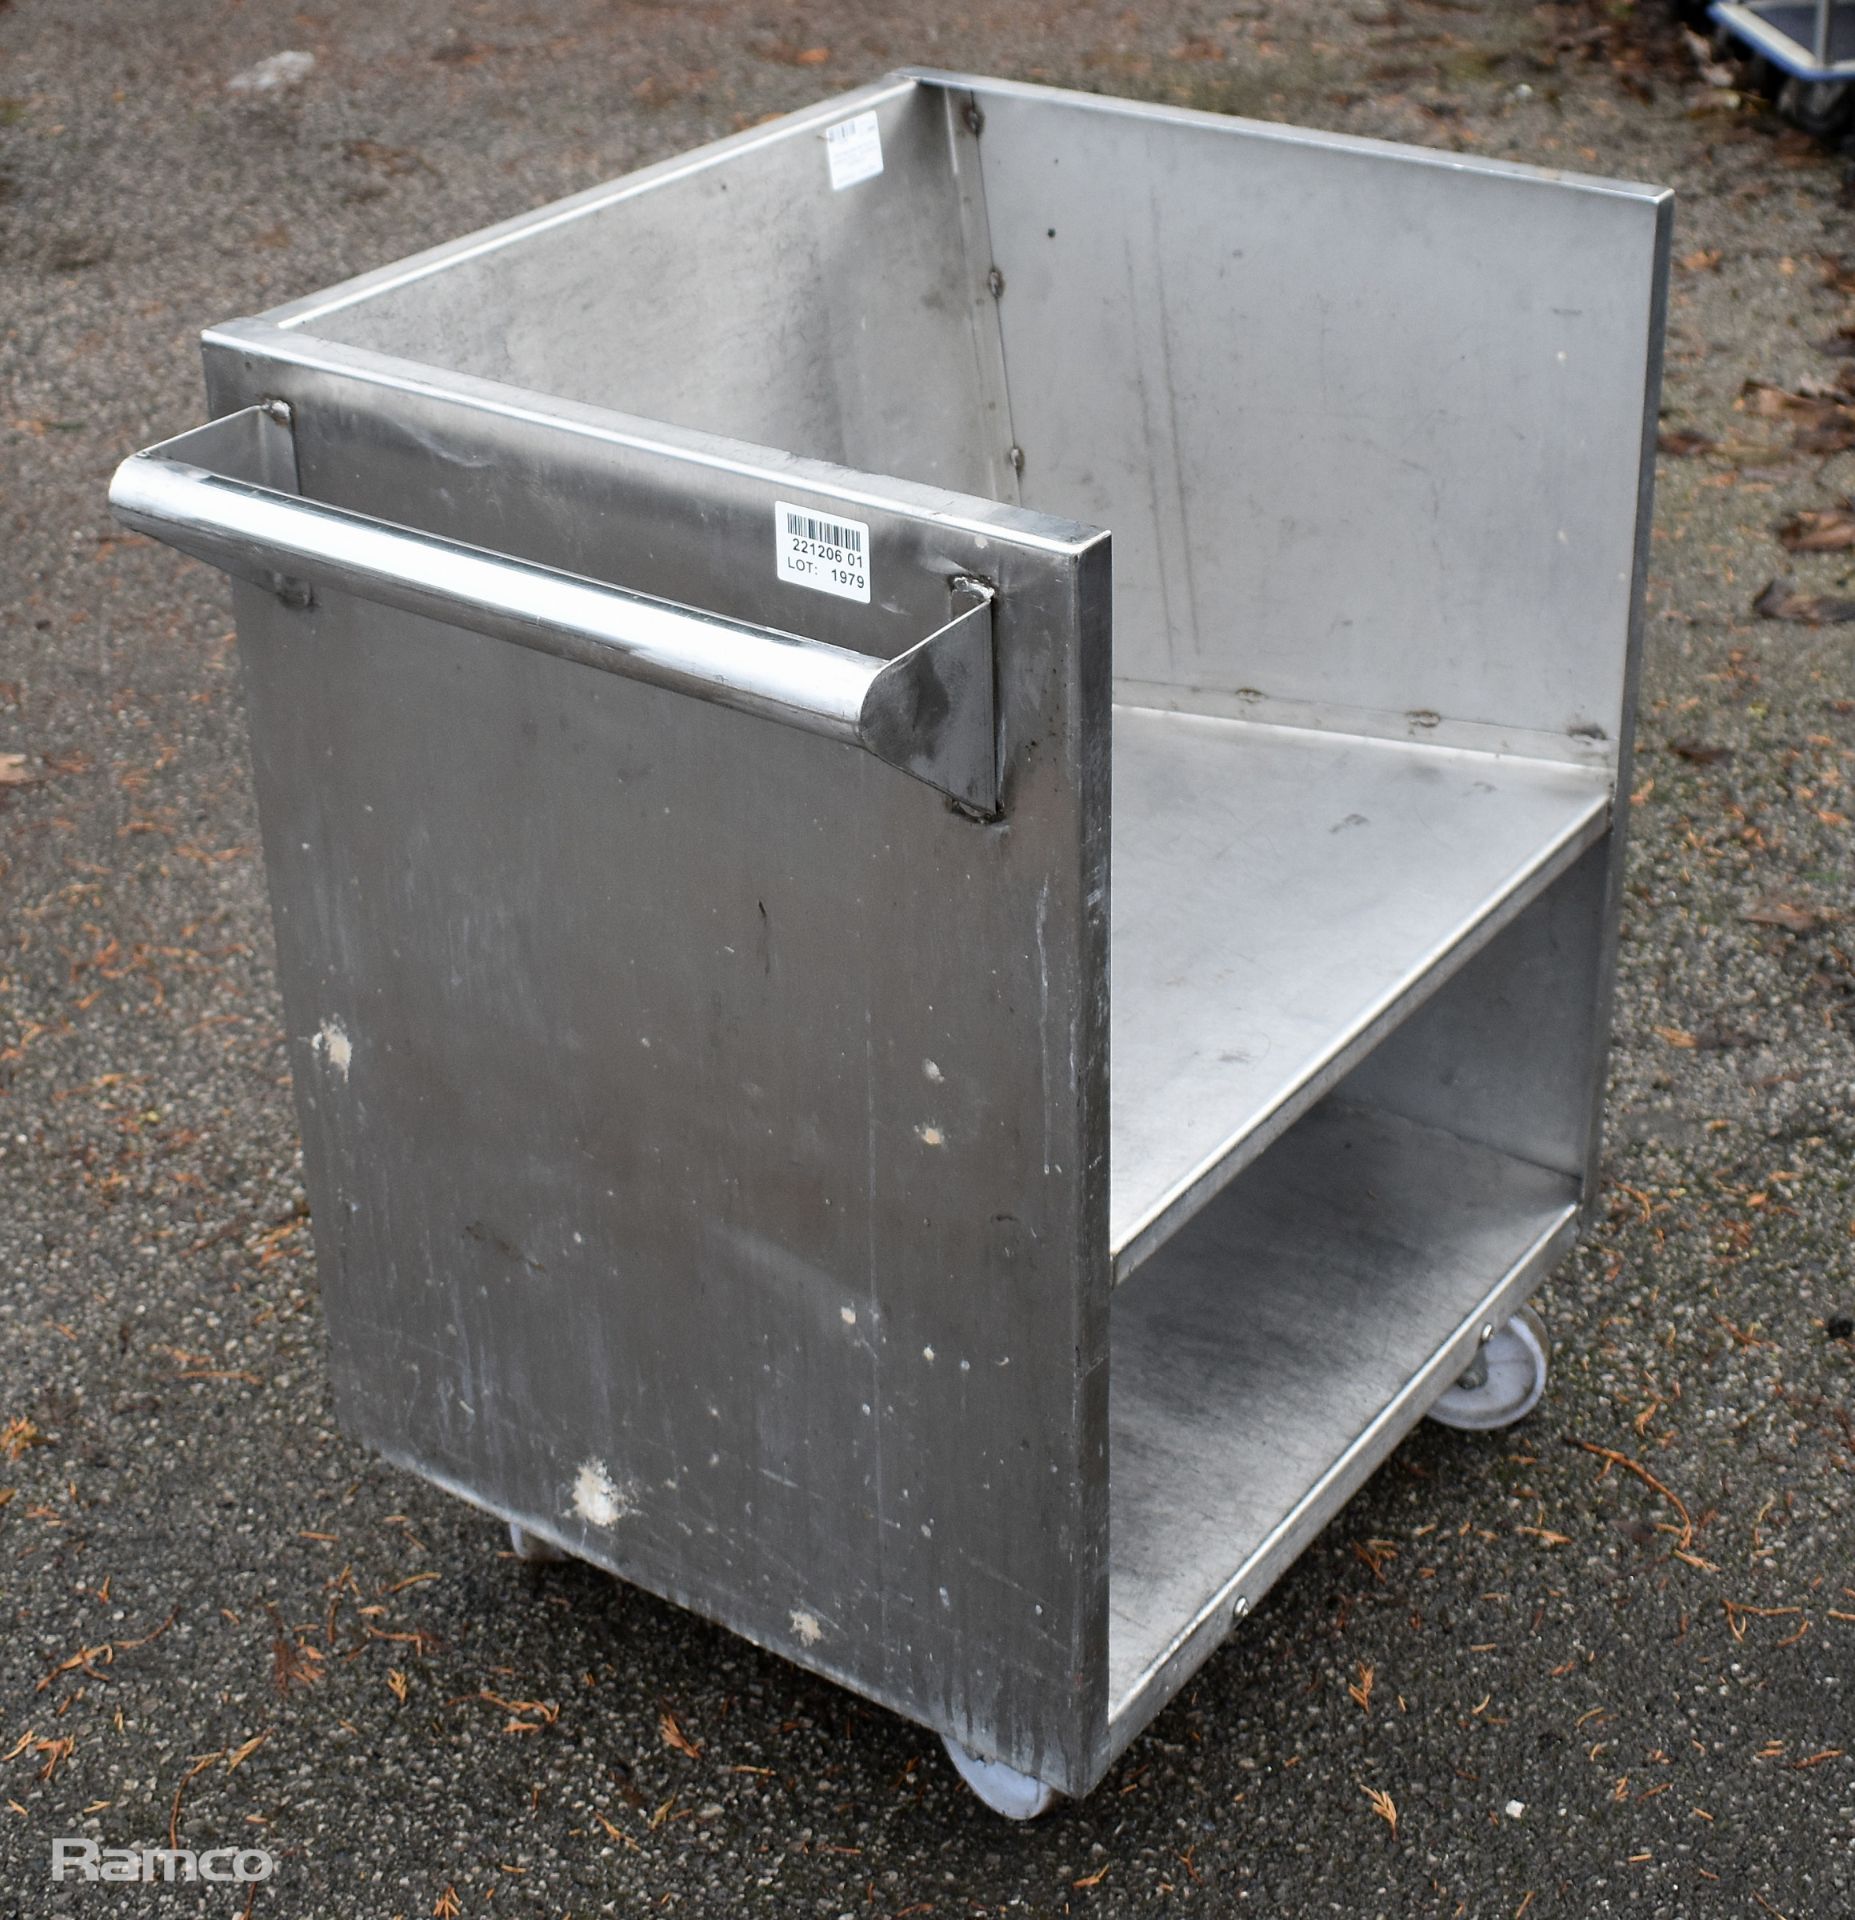 Stainless steel serving tray collection trolley - dimensions: 72 x 53 x 83cm - Image 2 of 3